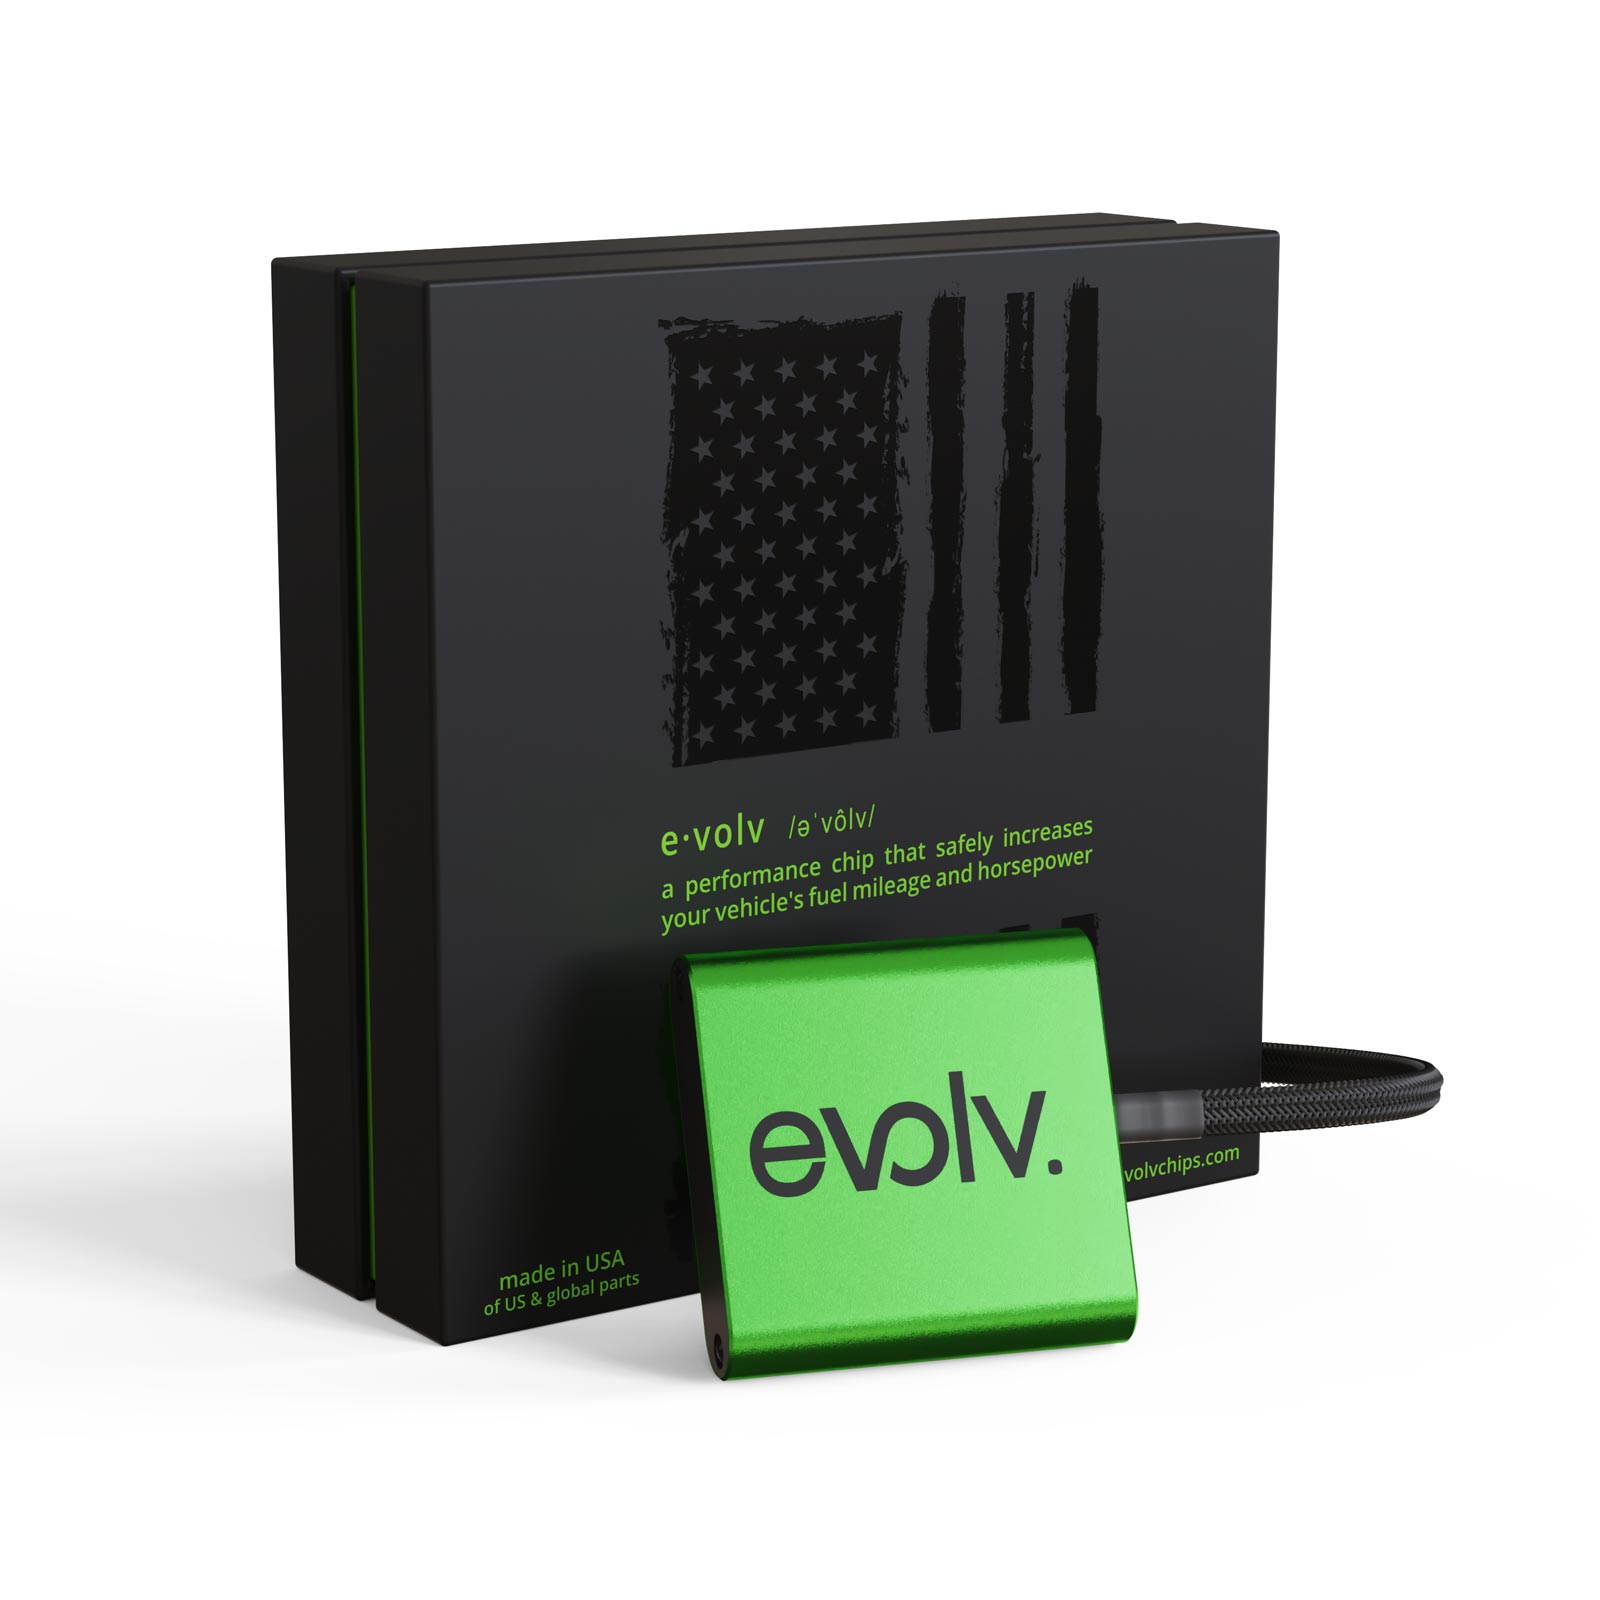 Increase your fuel mileage, performance and throttle response with an Evolv Plymouth Neon Performance Chip!